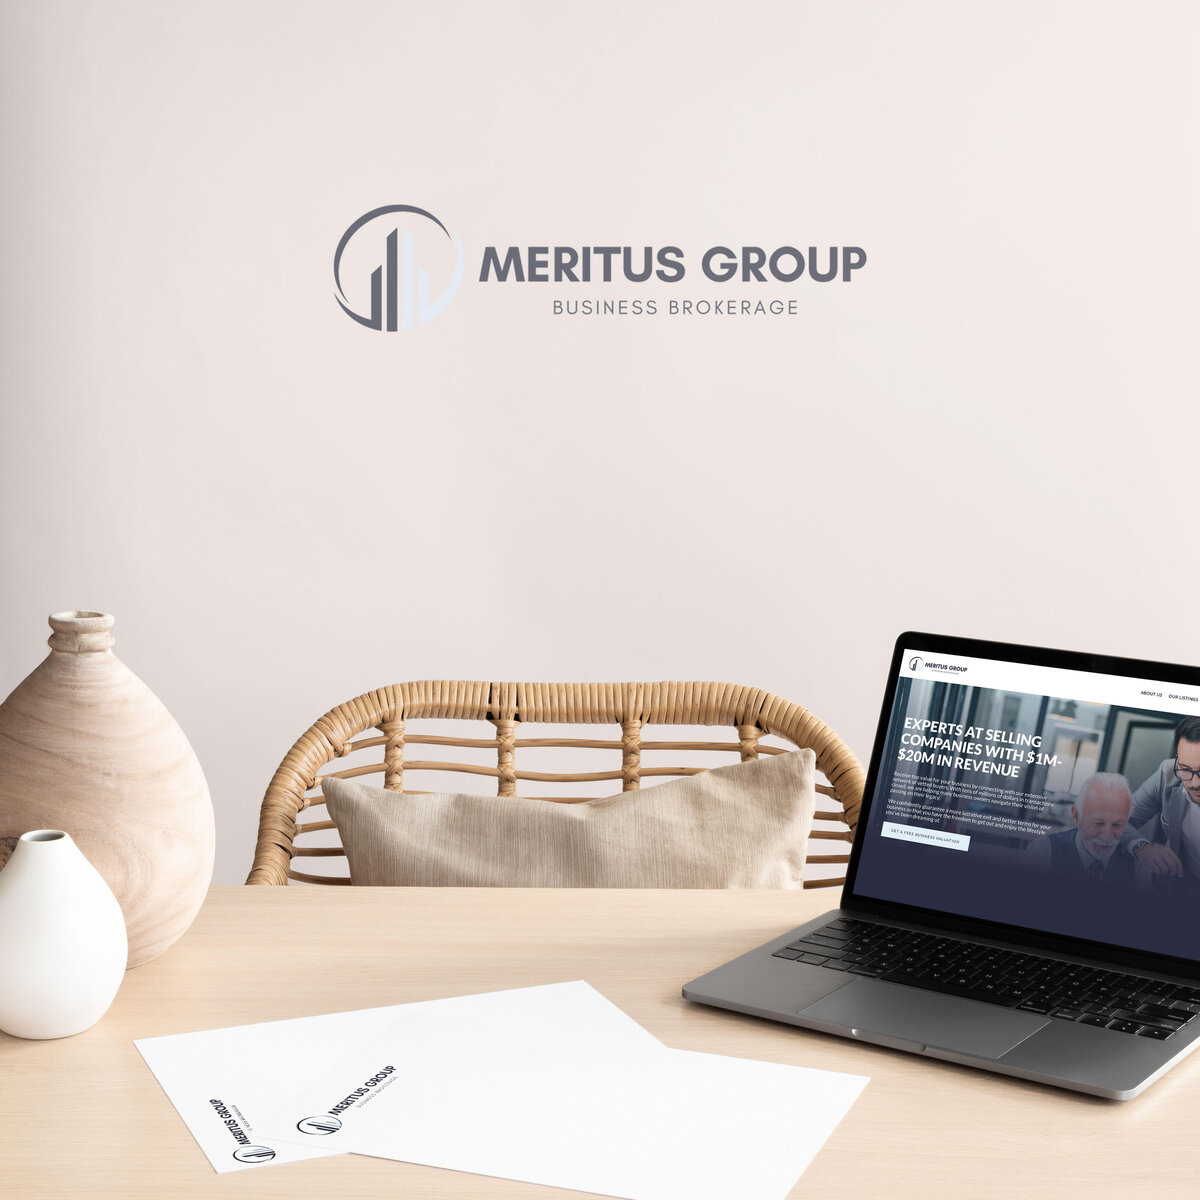 The Agency reimagines Meritus Group Business Brokerage with an iconic logo design that encapsulates your company's values and vision. Let our branding expertise carve your niche in the marketplace.